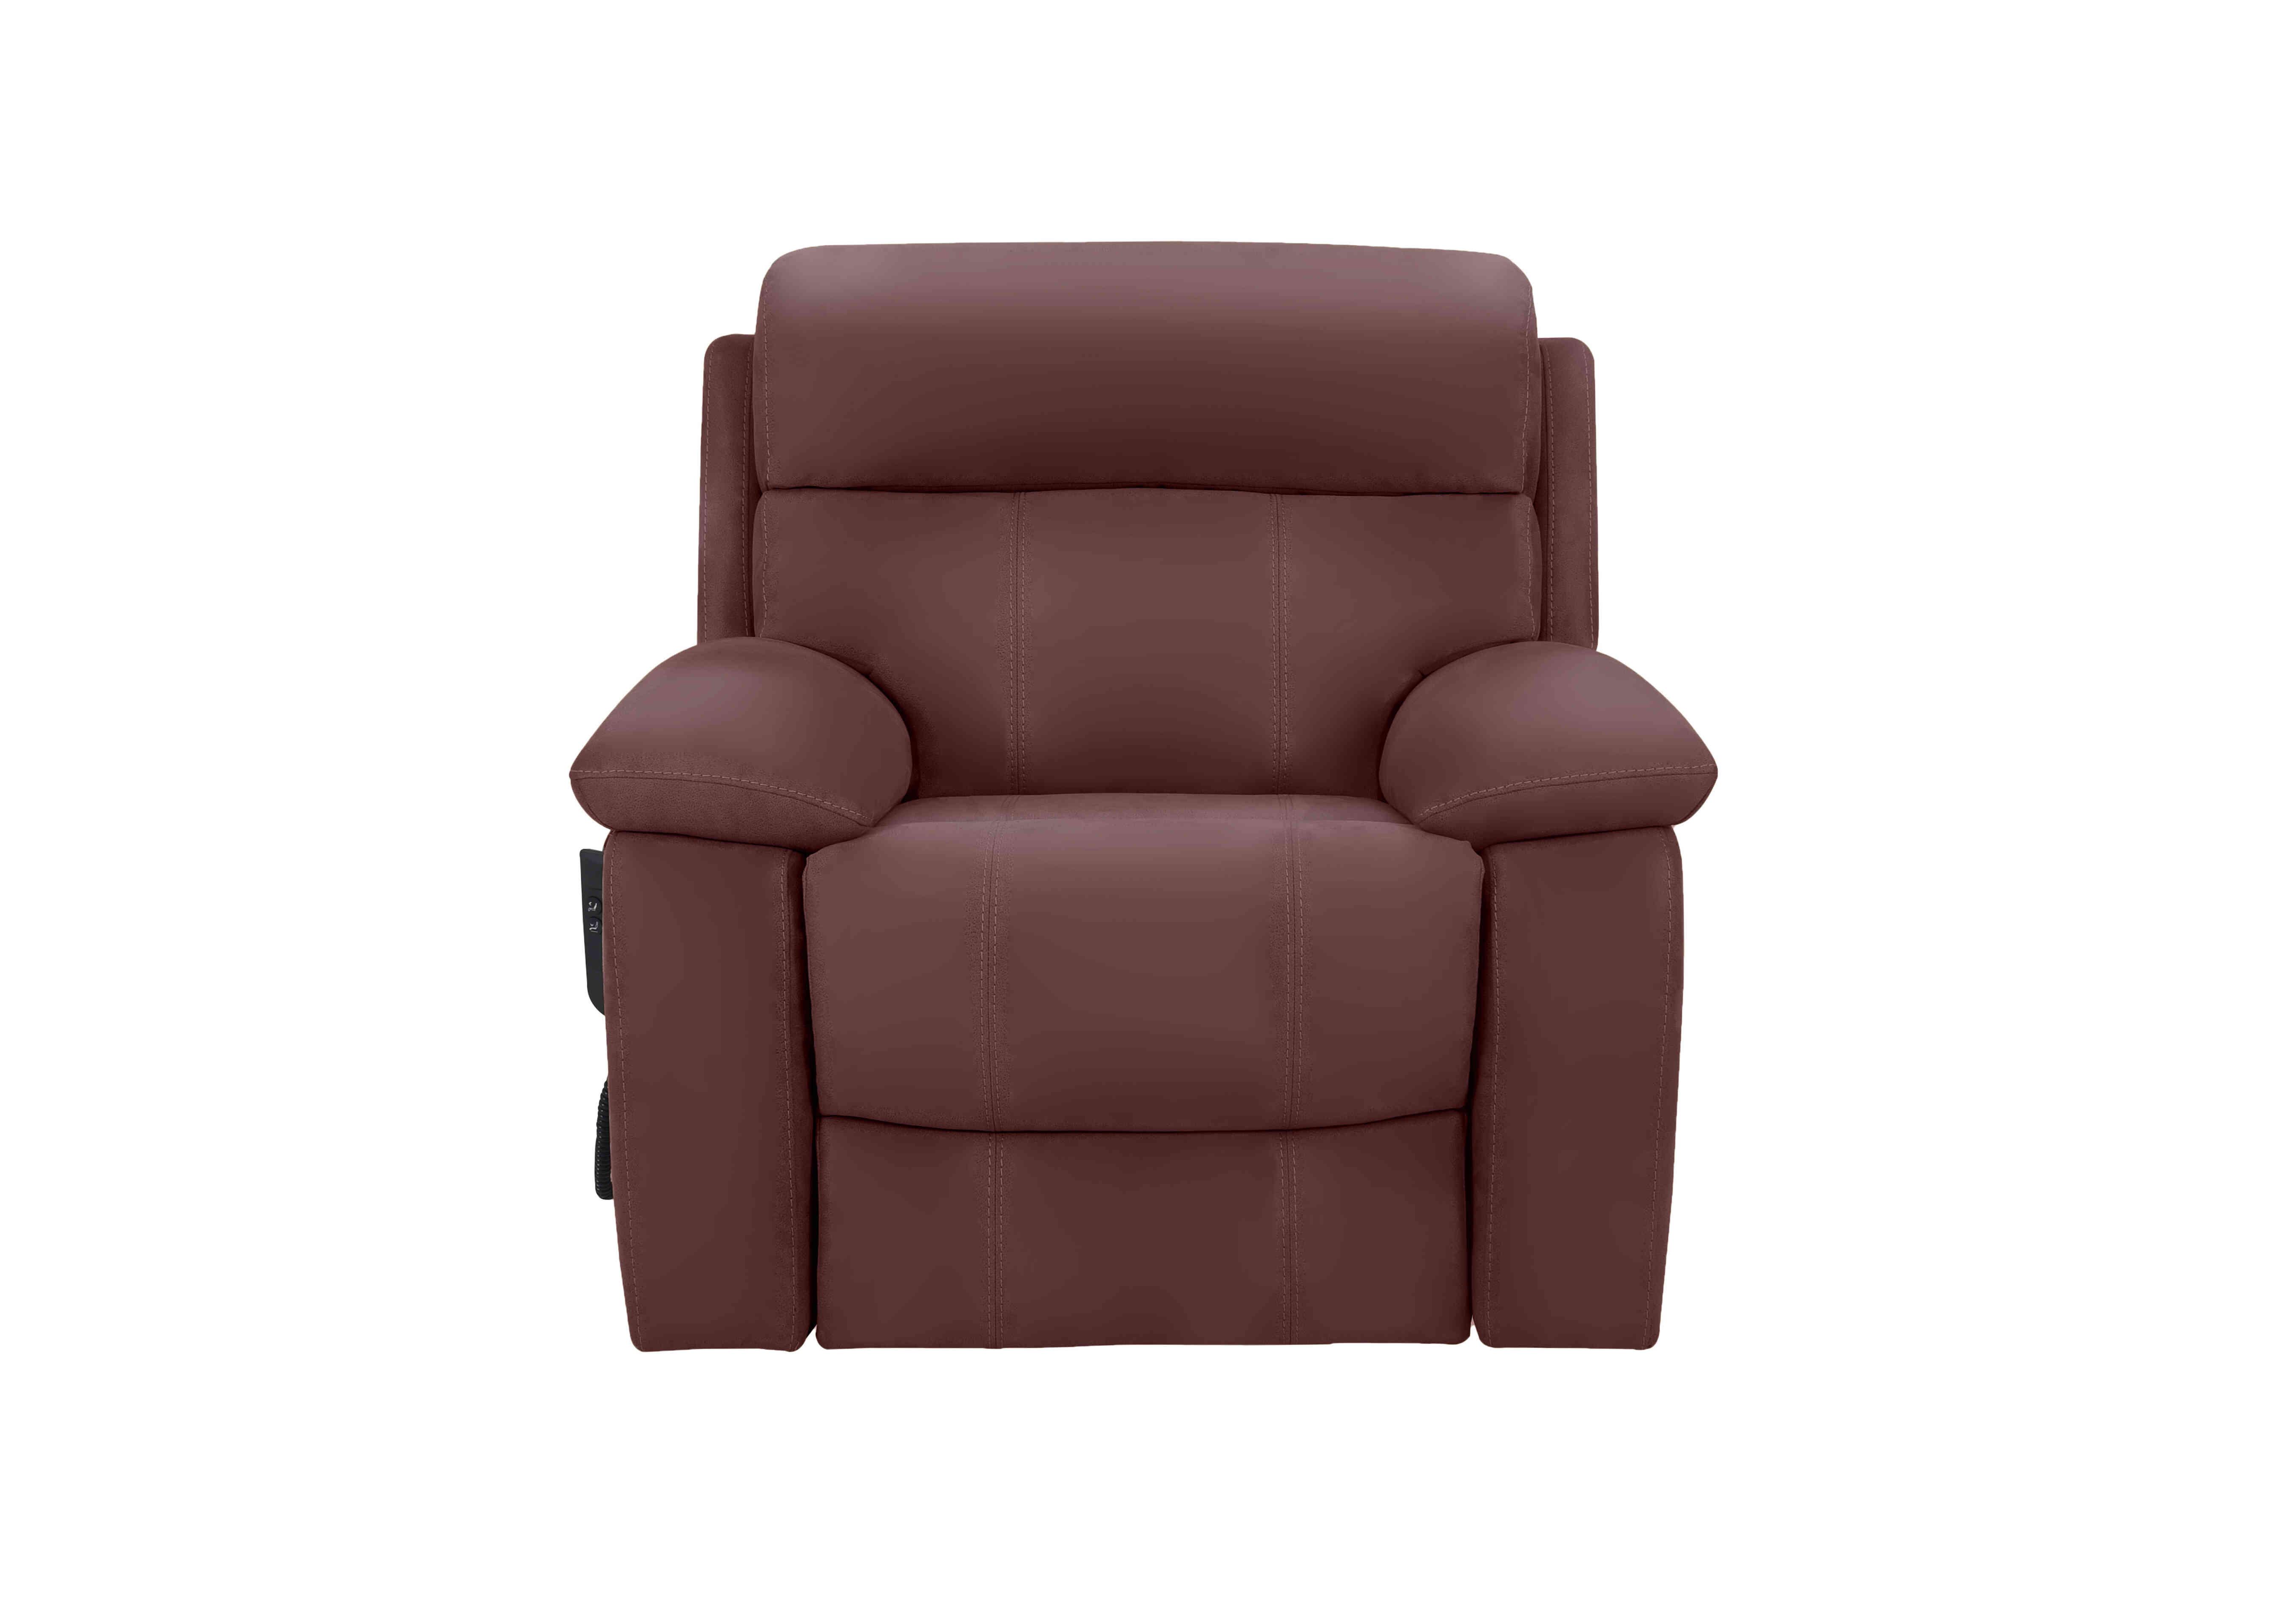 Moreno Leather Lift and Rise Chair in An-751b Burgundy on Furniture Village